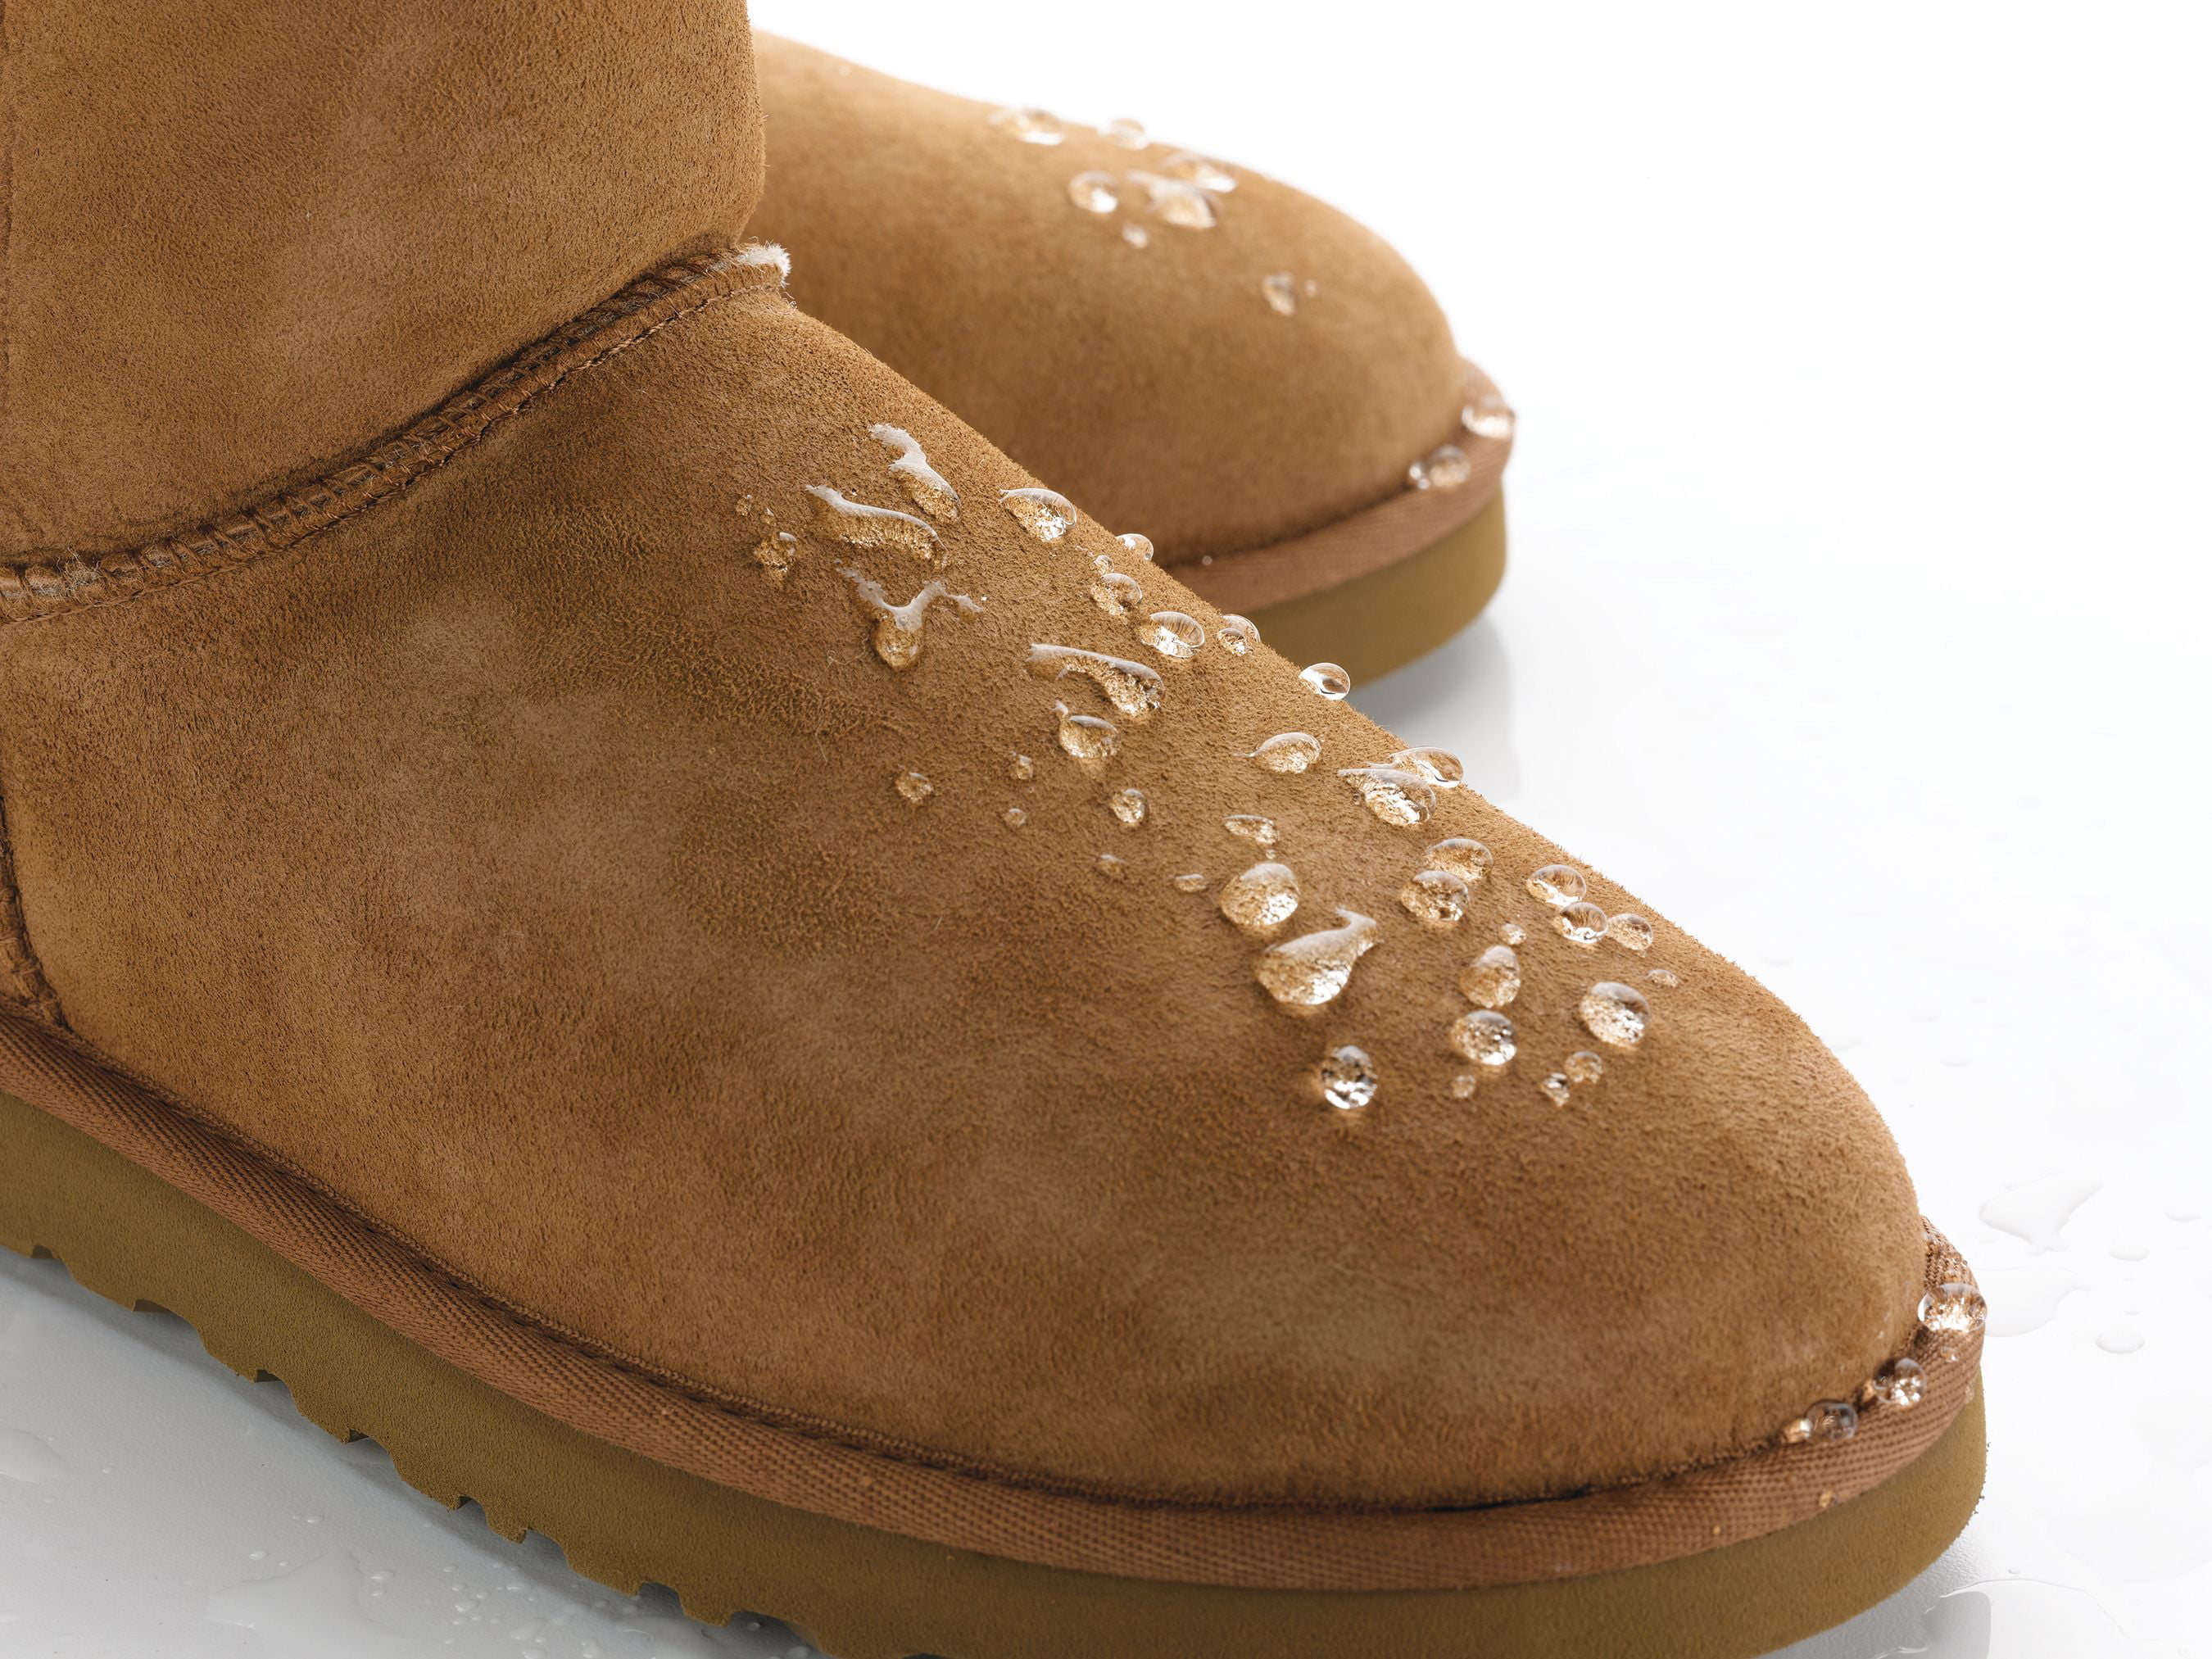 suede protector for boots